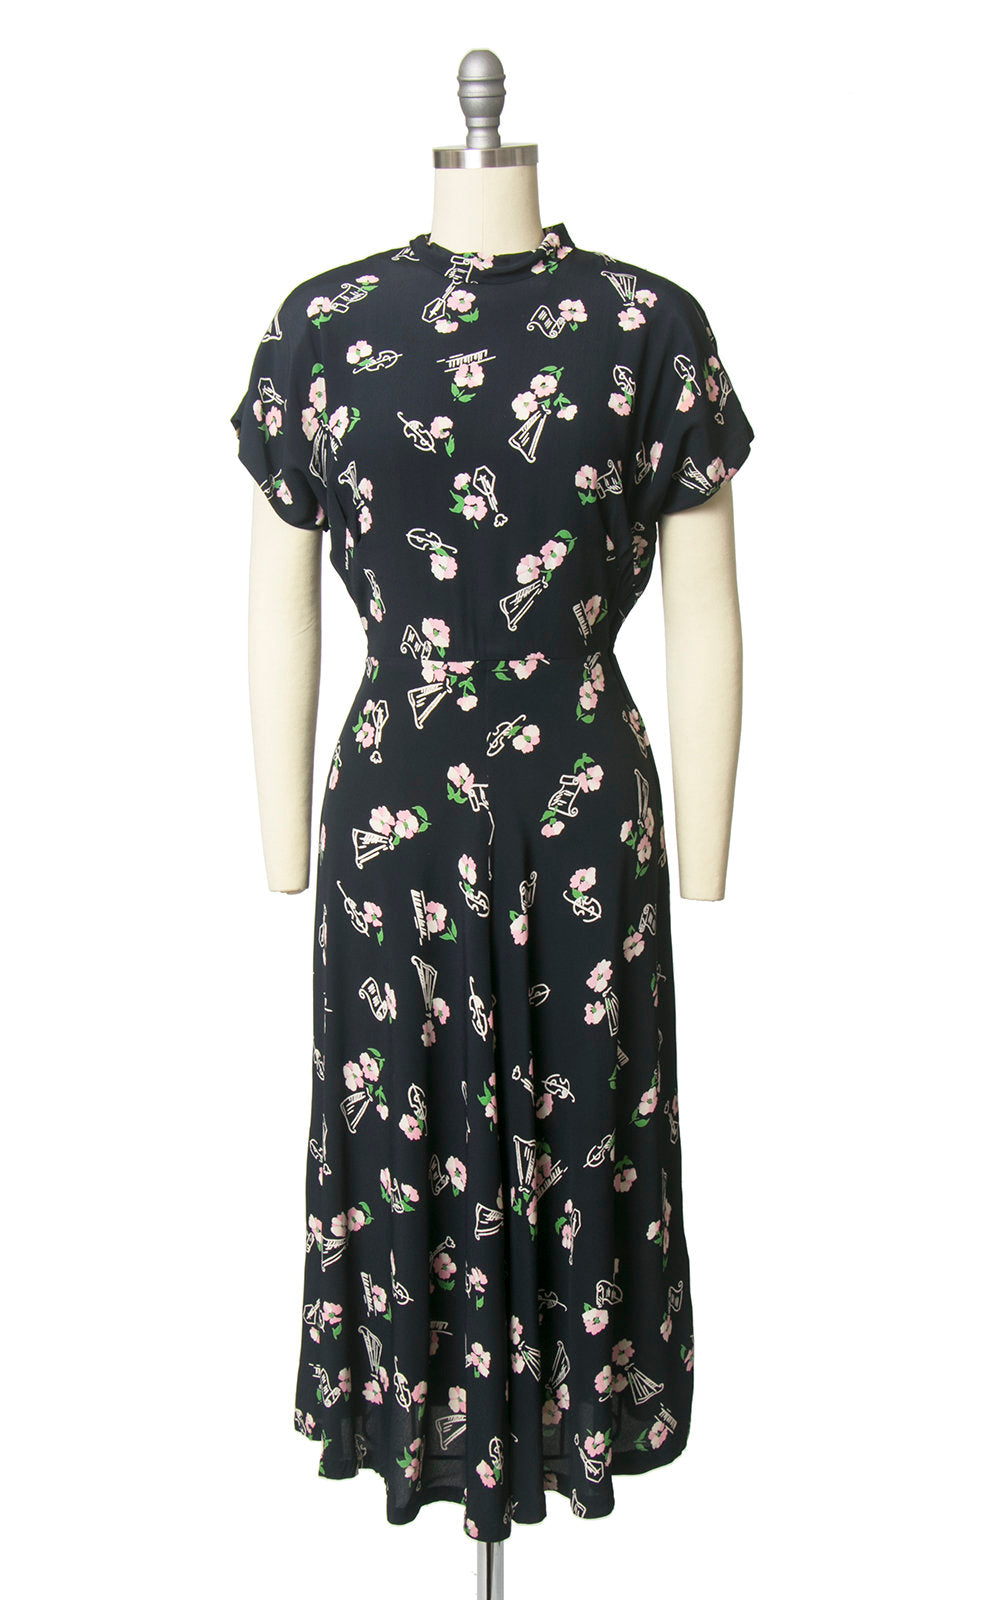 Vintage 1940s Dress | 40s Music Instruments Novelty Print Floral Rayon Crepe Navy Blue Cocktail Dress (small)